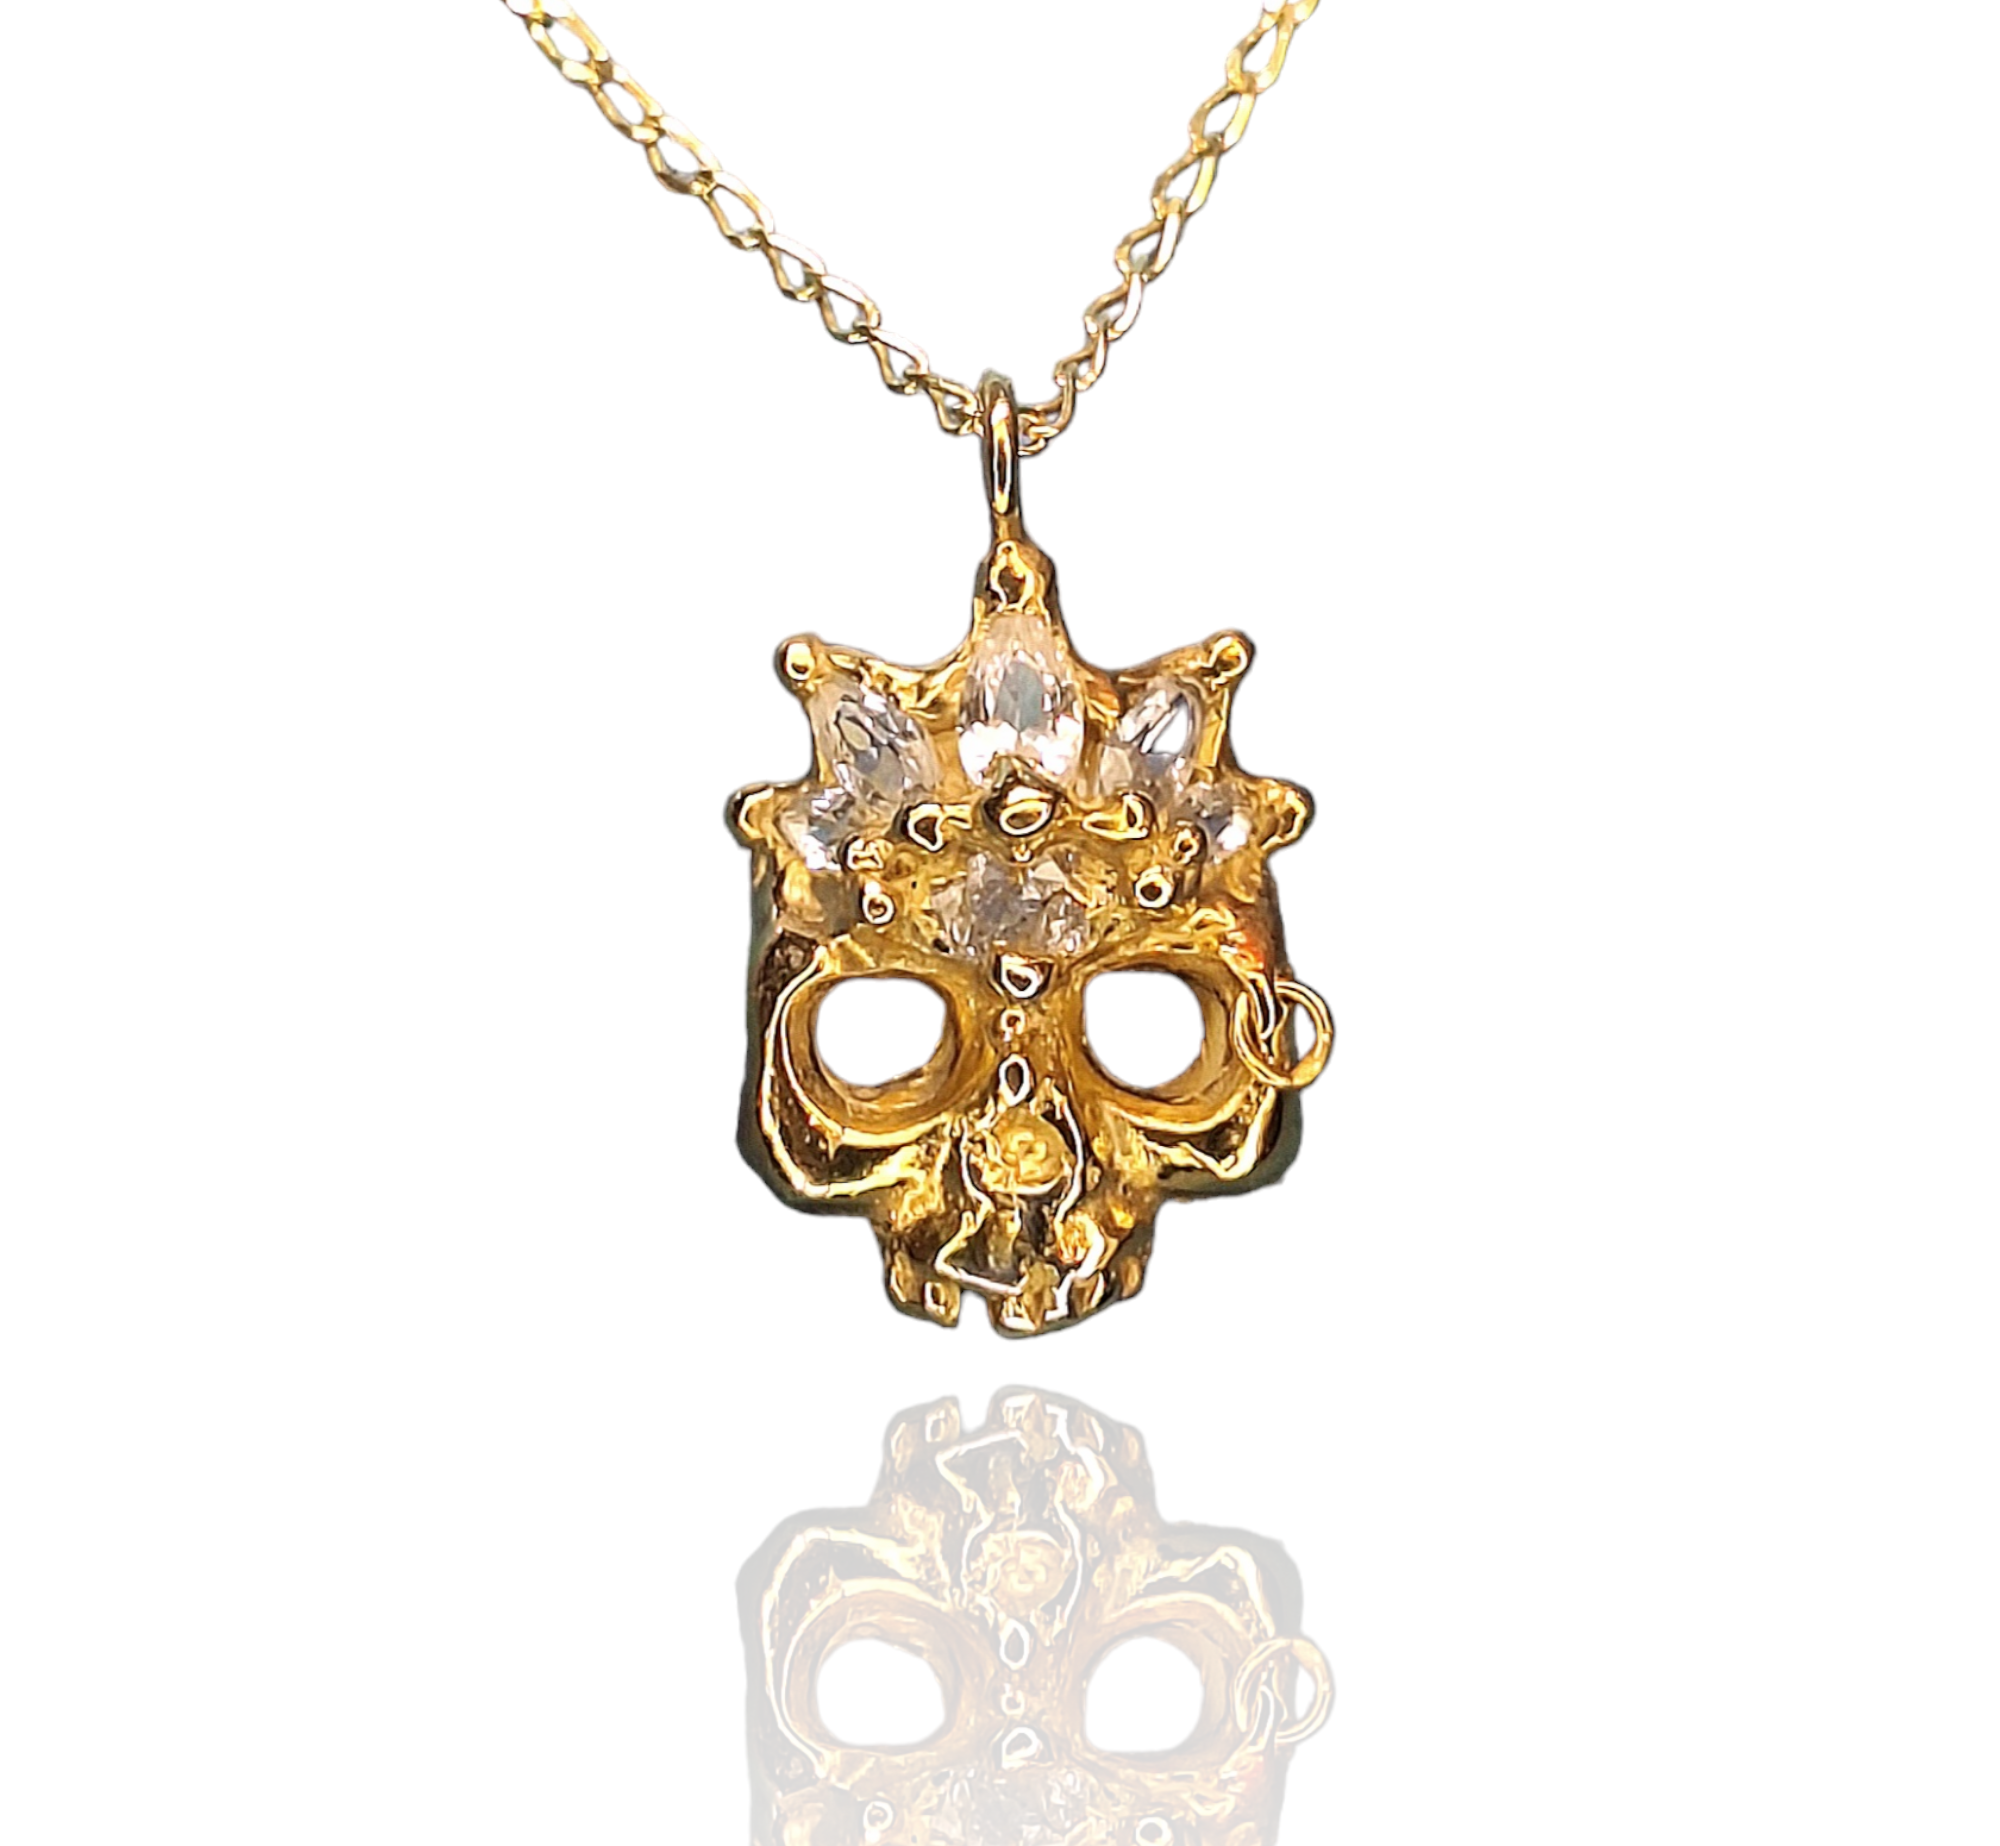 Pirate Queen - Gold plated sterling silver and lab sapphire necklace